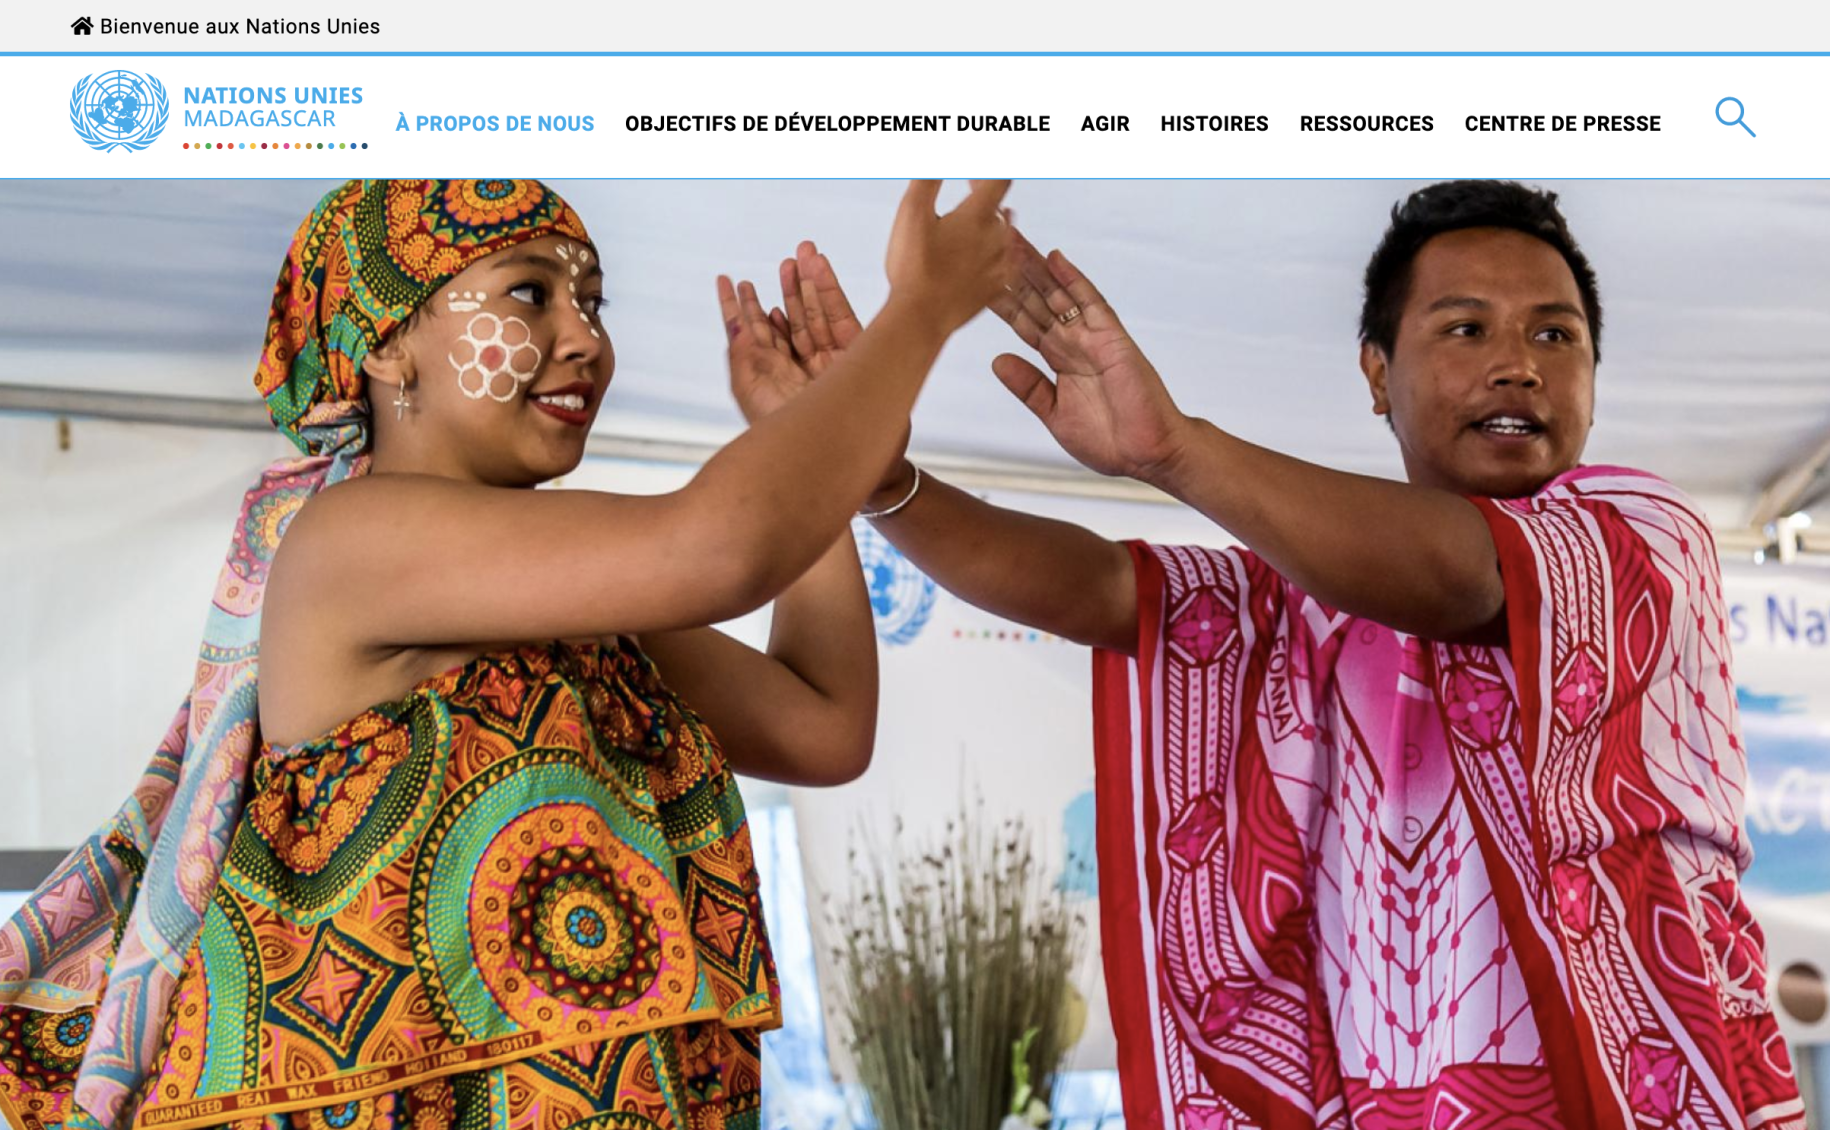 Screenshot of the UN in Madagascar section of their website, which shows a woman and man dressed in traditional garments performing.